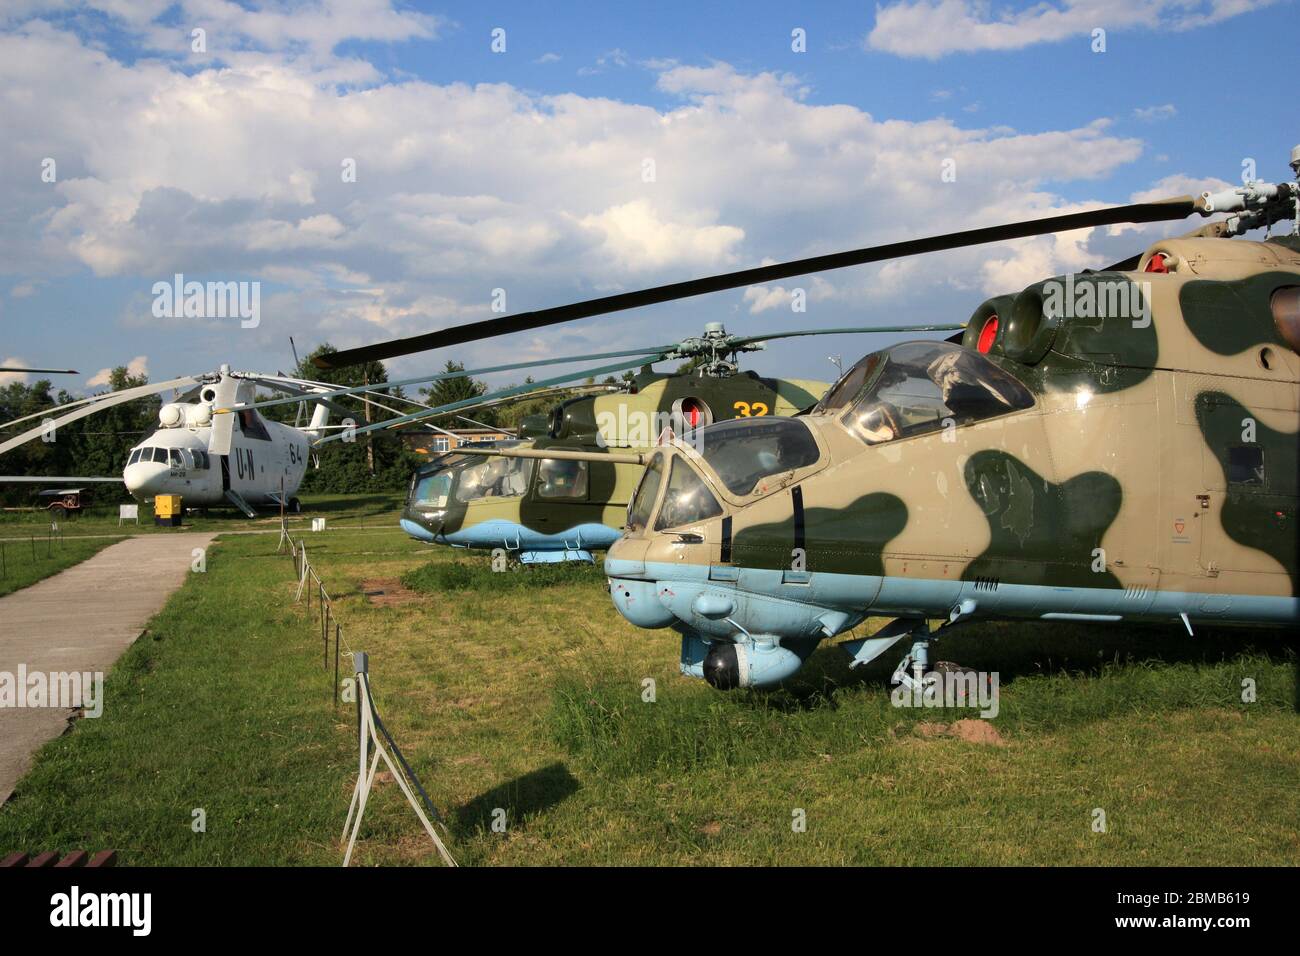 Soviet aviation legends next to each other, a Mi-24A 'Stakan', Mi-24D 'Hind' and a Mi-26 'Halo' at the Zhulyany State Aviation Museum of Ukraine Stock Photo